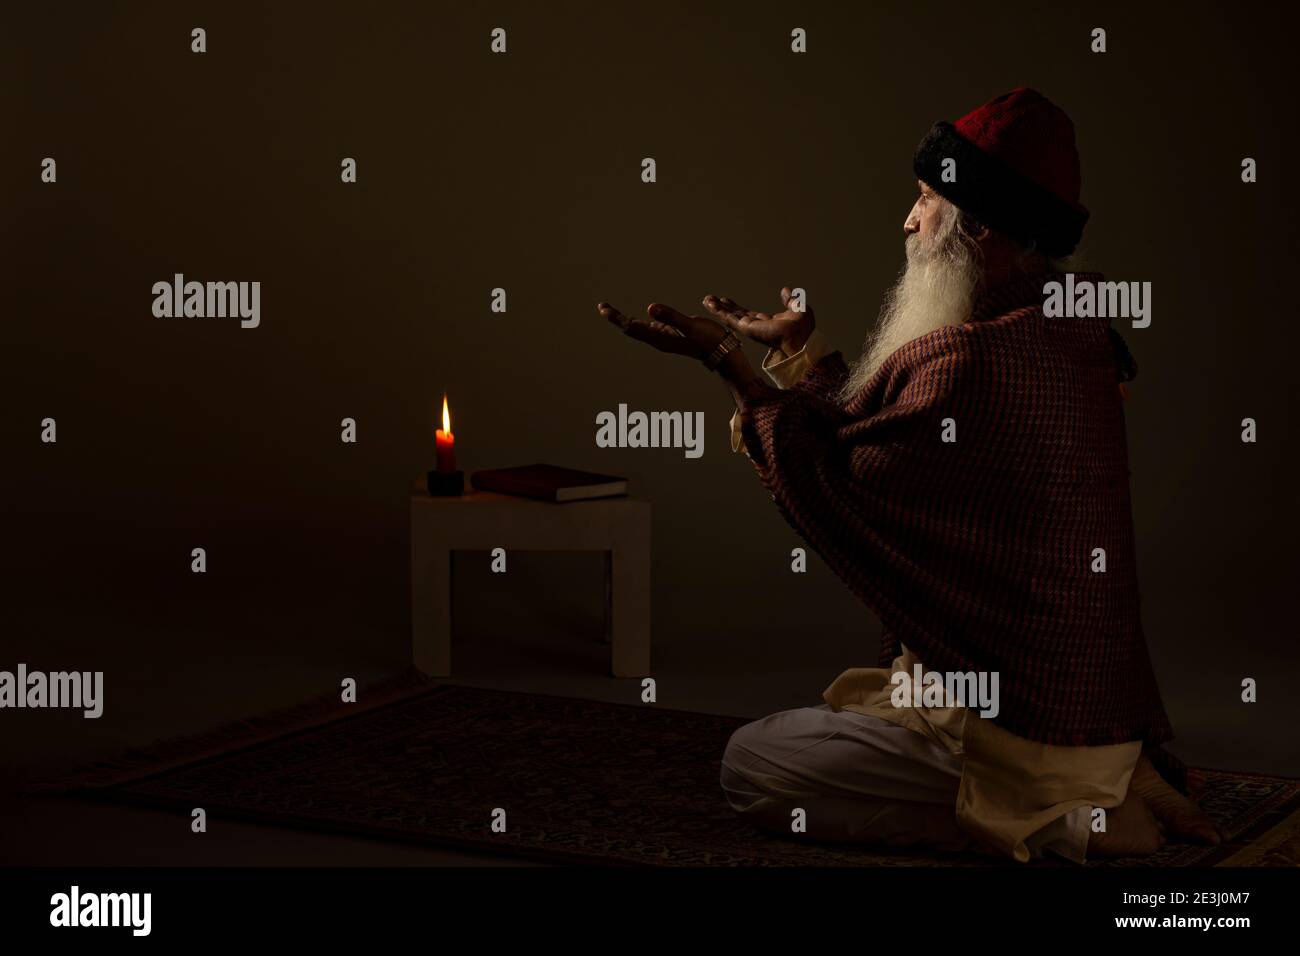 AN OLD MAN SITTING ALONE AND PRAYING Stock Photo